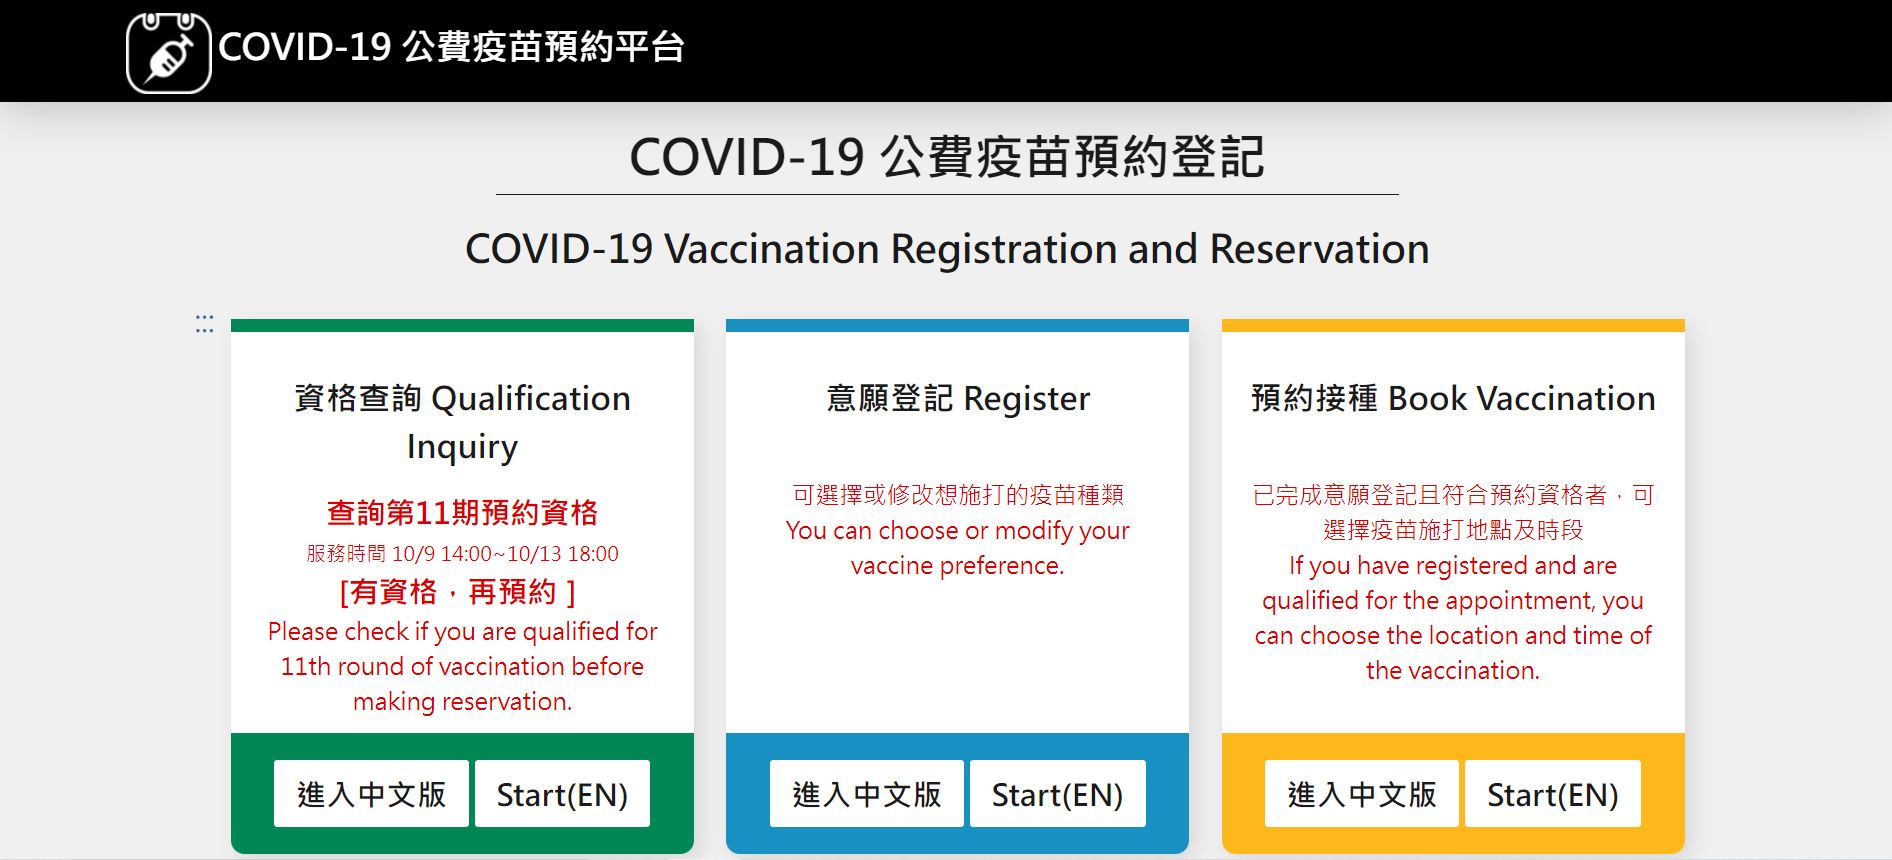 New residents can register online to make an appointment for vaccinations. (Photo / Retrieved from COVID-19 registration platform)